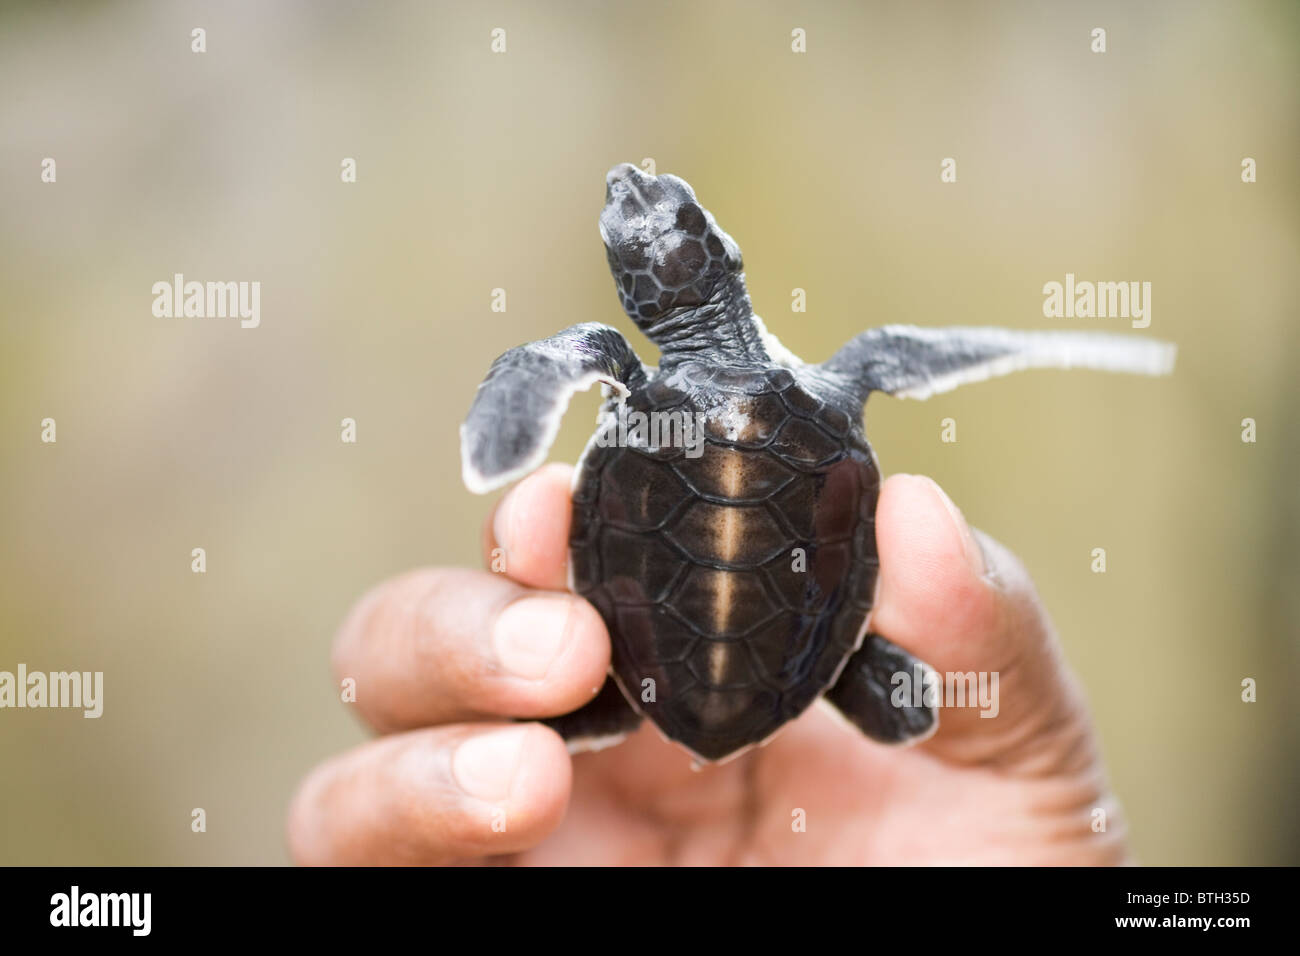 Green Turtle (Chelonia mydas). Hatchling held in a hand, showing shell dorsal surface, topside or carapace. Stock Photo